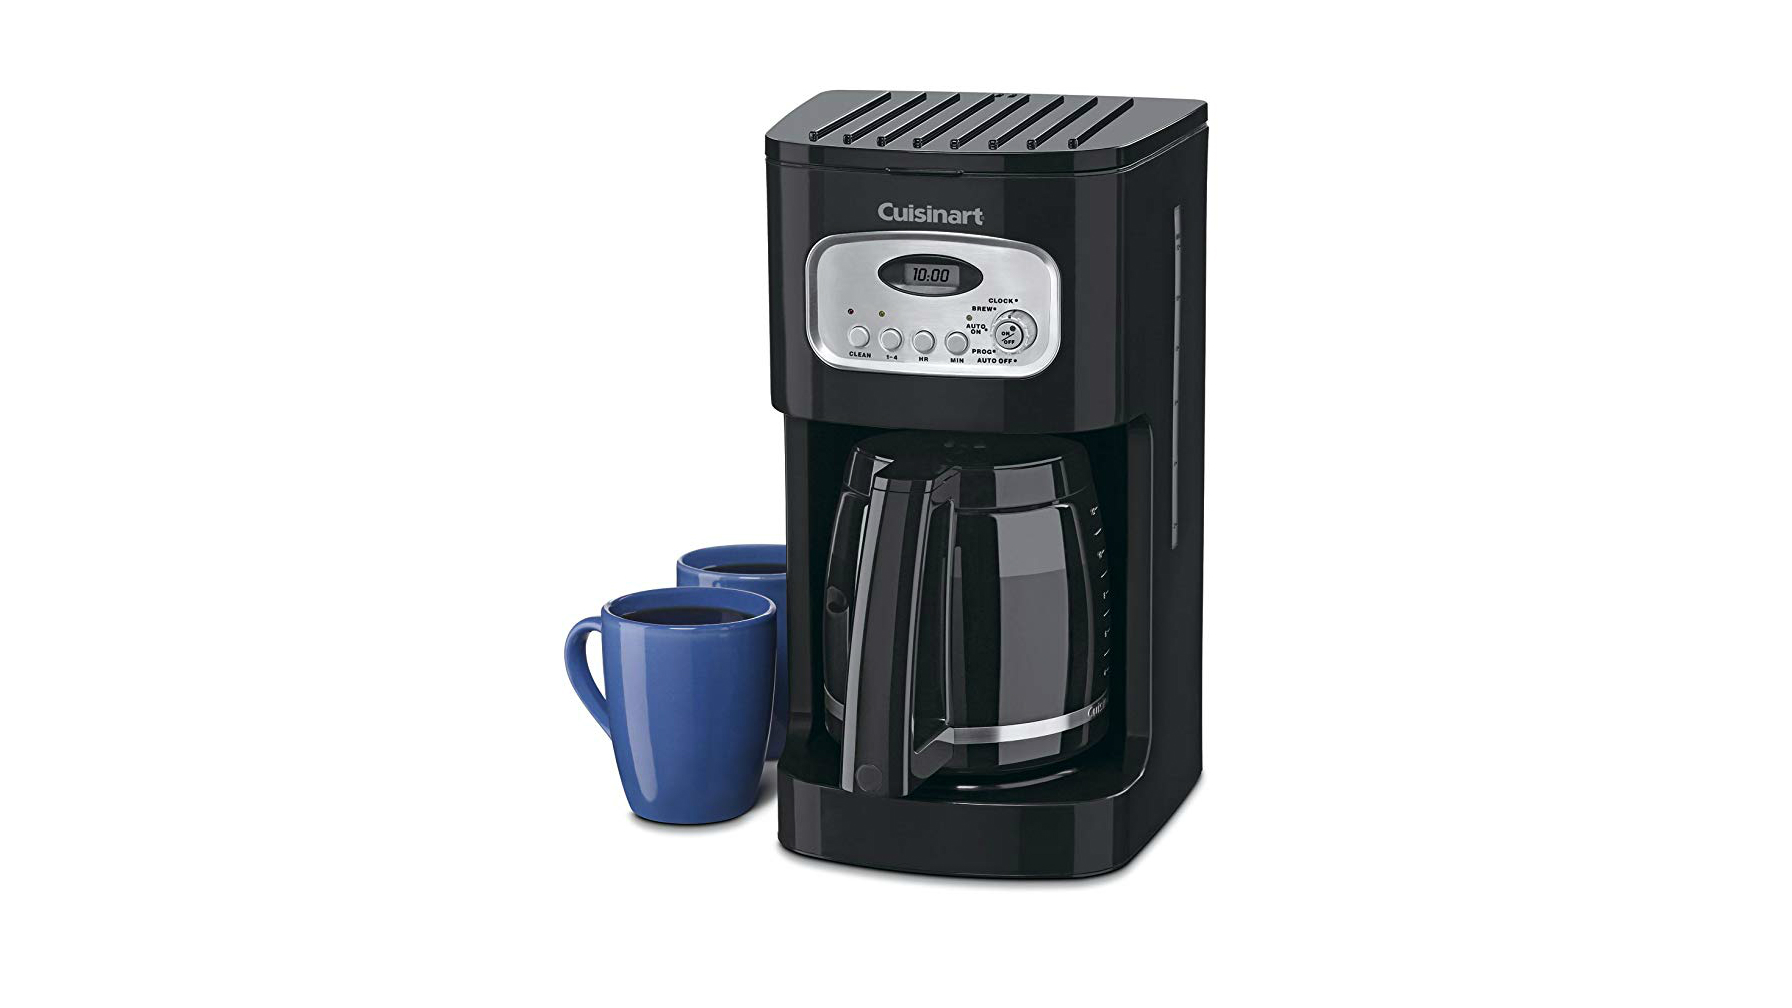 Sale offers of cheap coffee machines